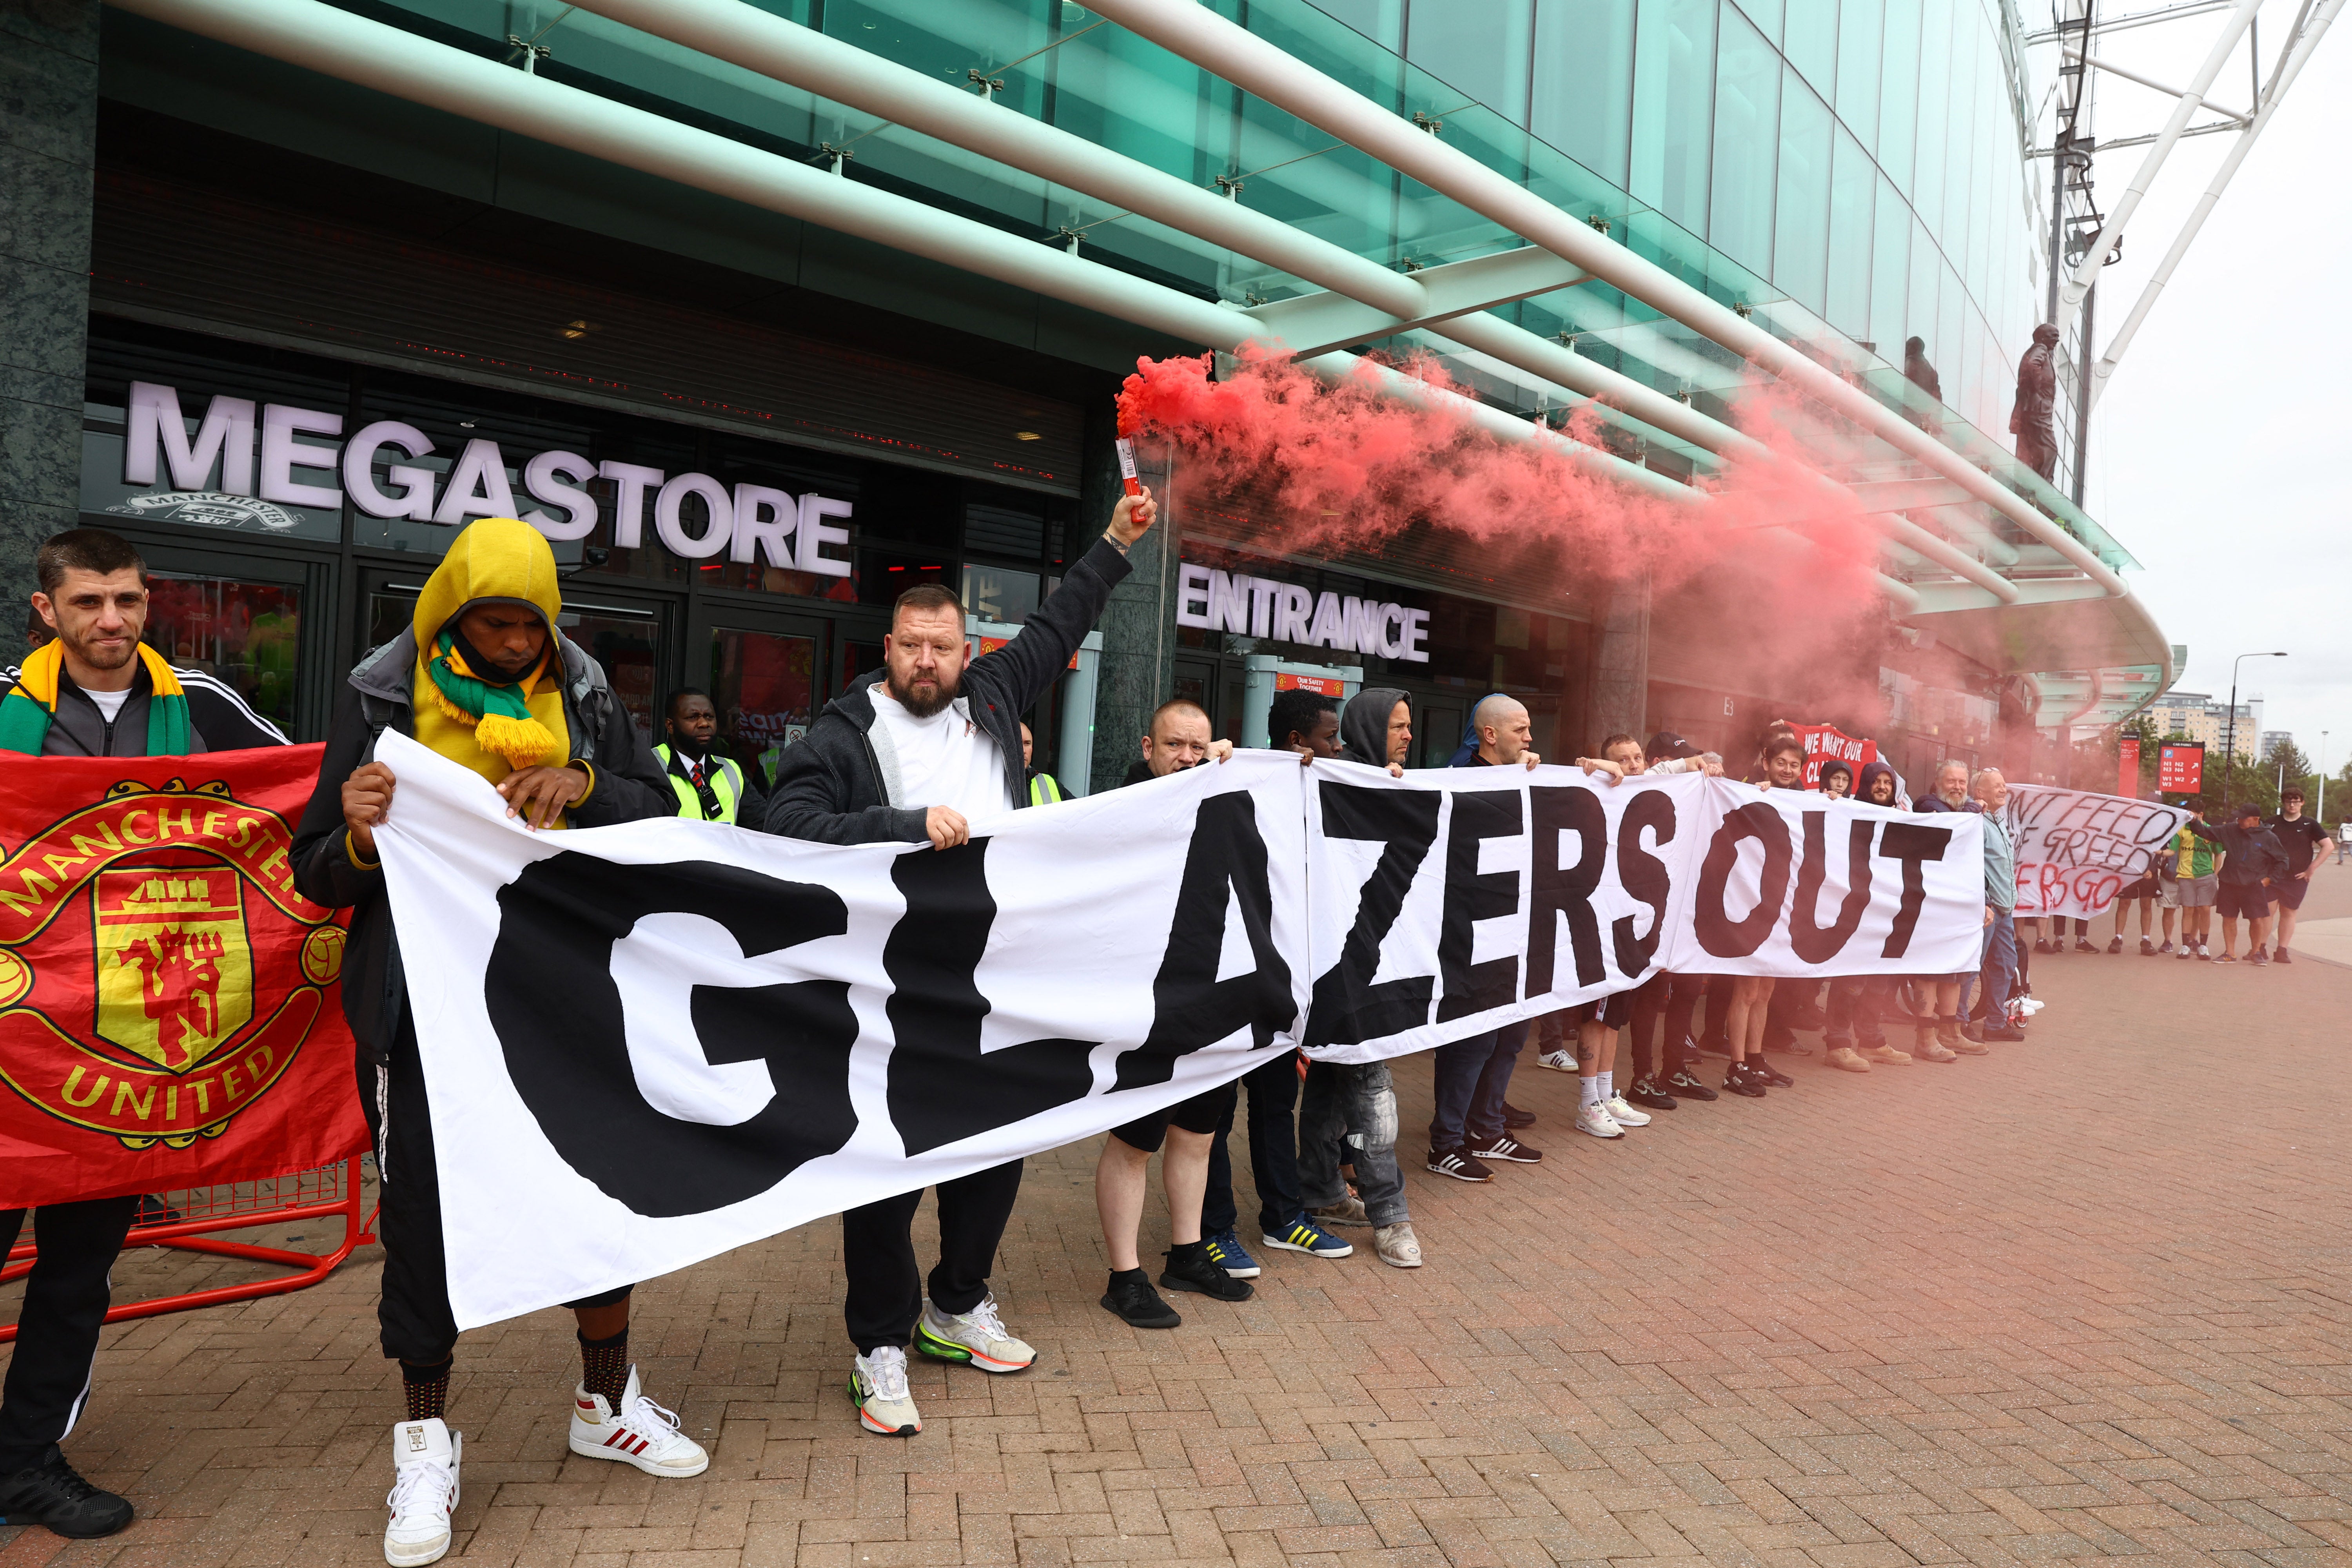 The Glazers’ ownership has frustrated Man United fans for years